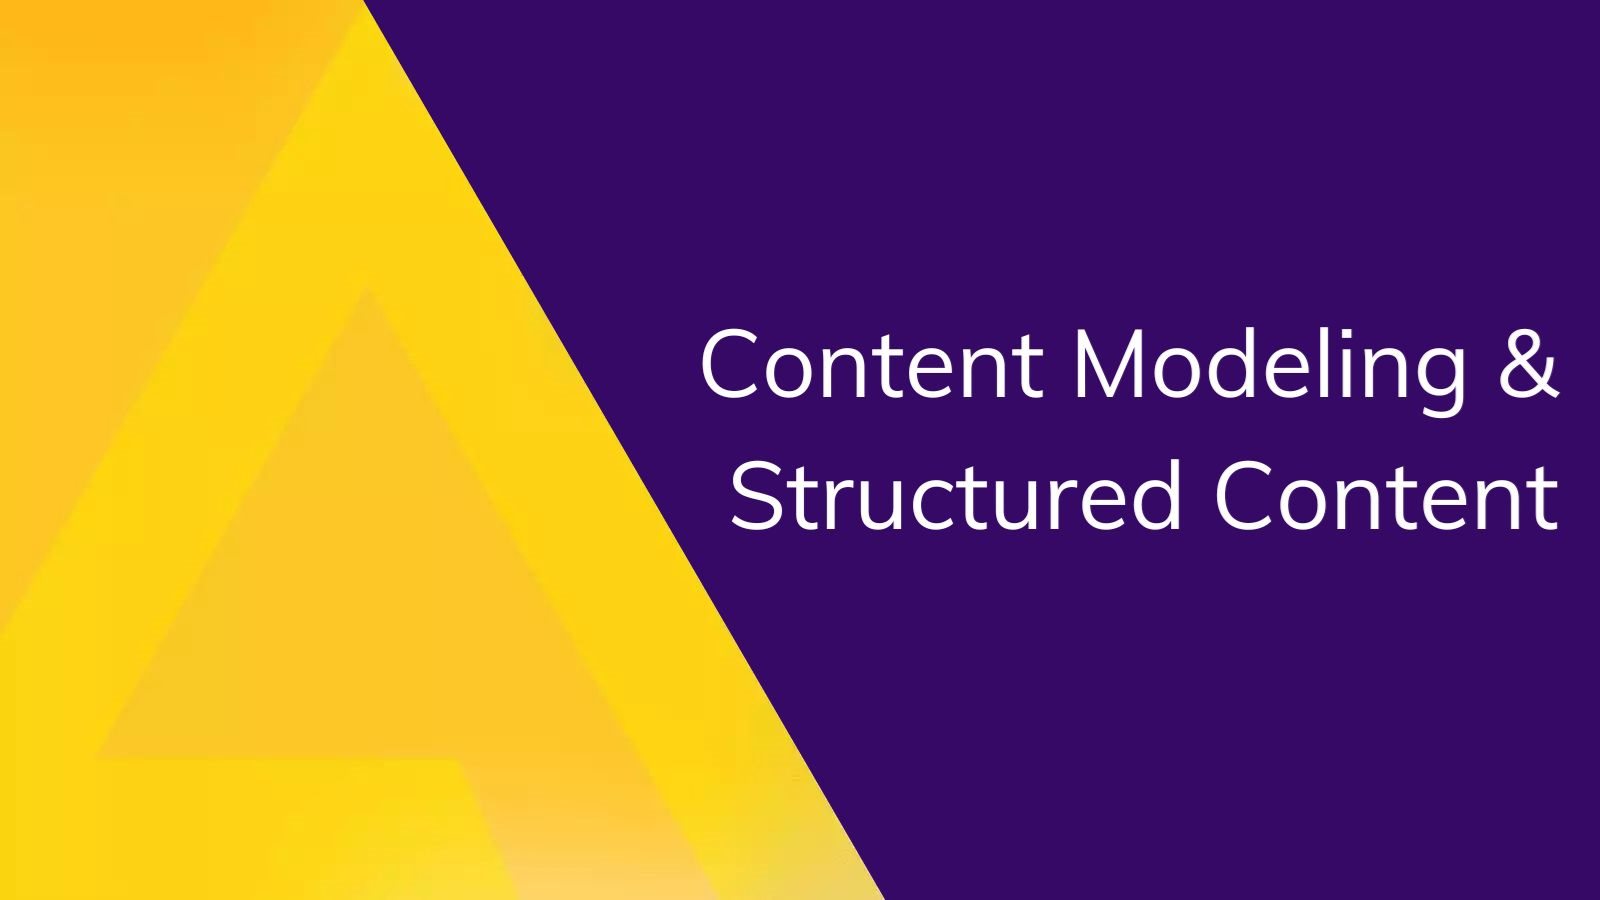 Content Modeling & Structured Content 